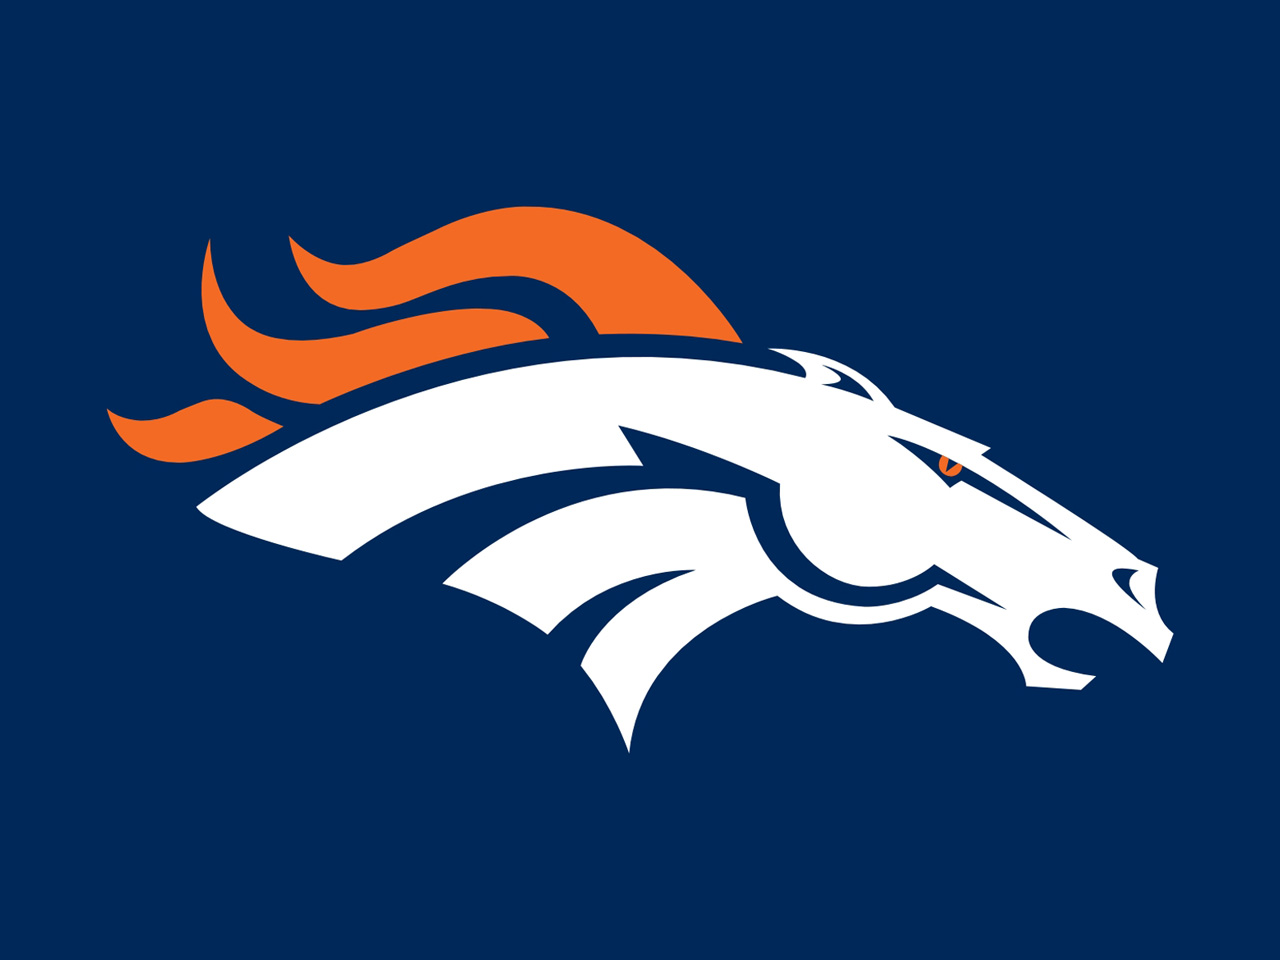 Hope you like this wallpaper as much as we do! Denver Broncos wallpaper